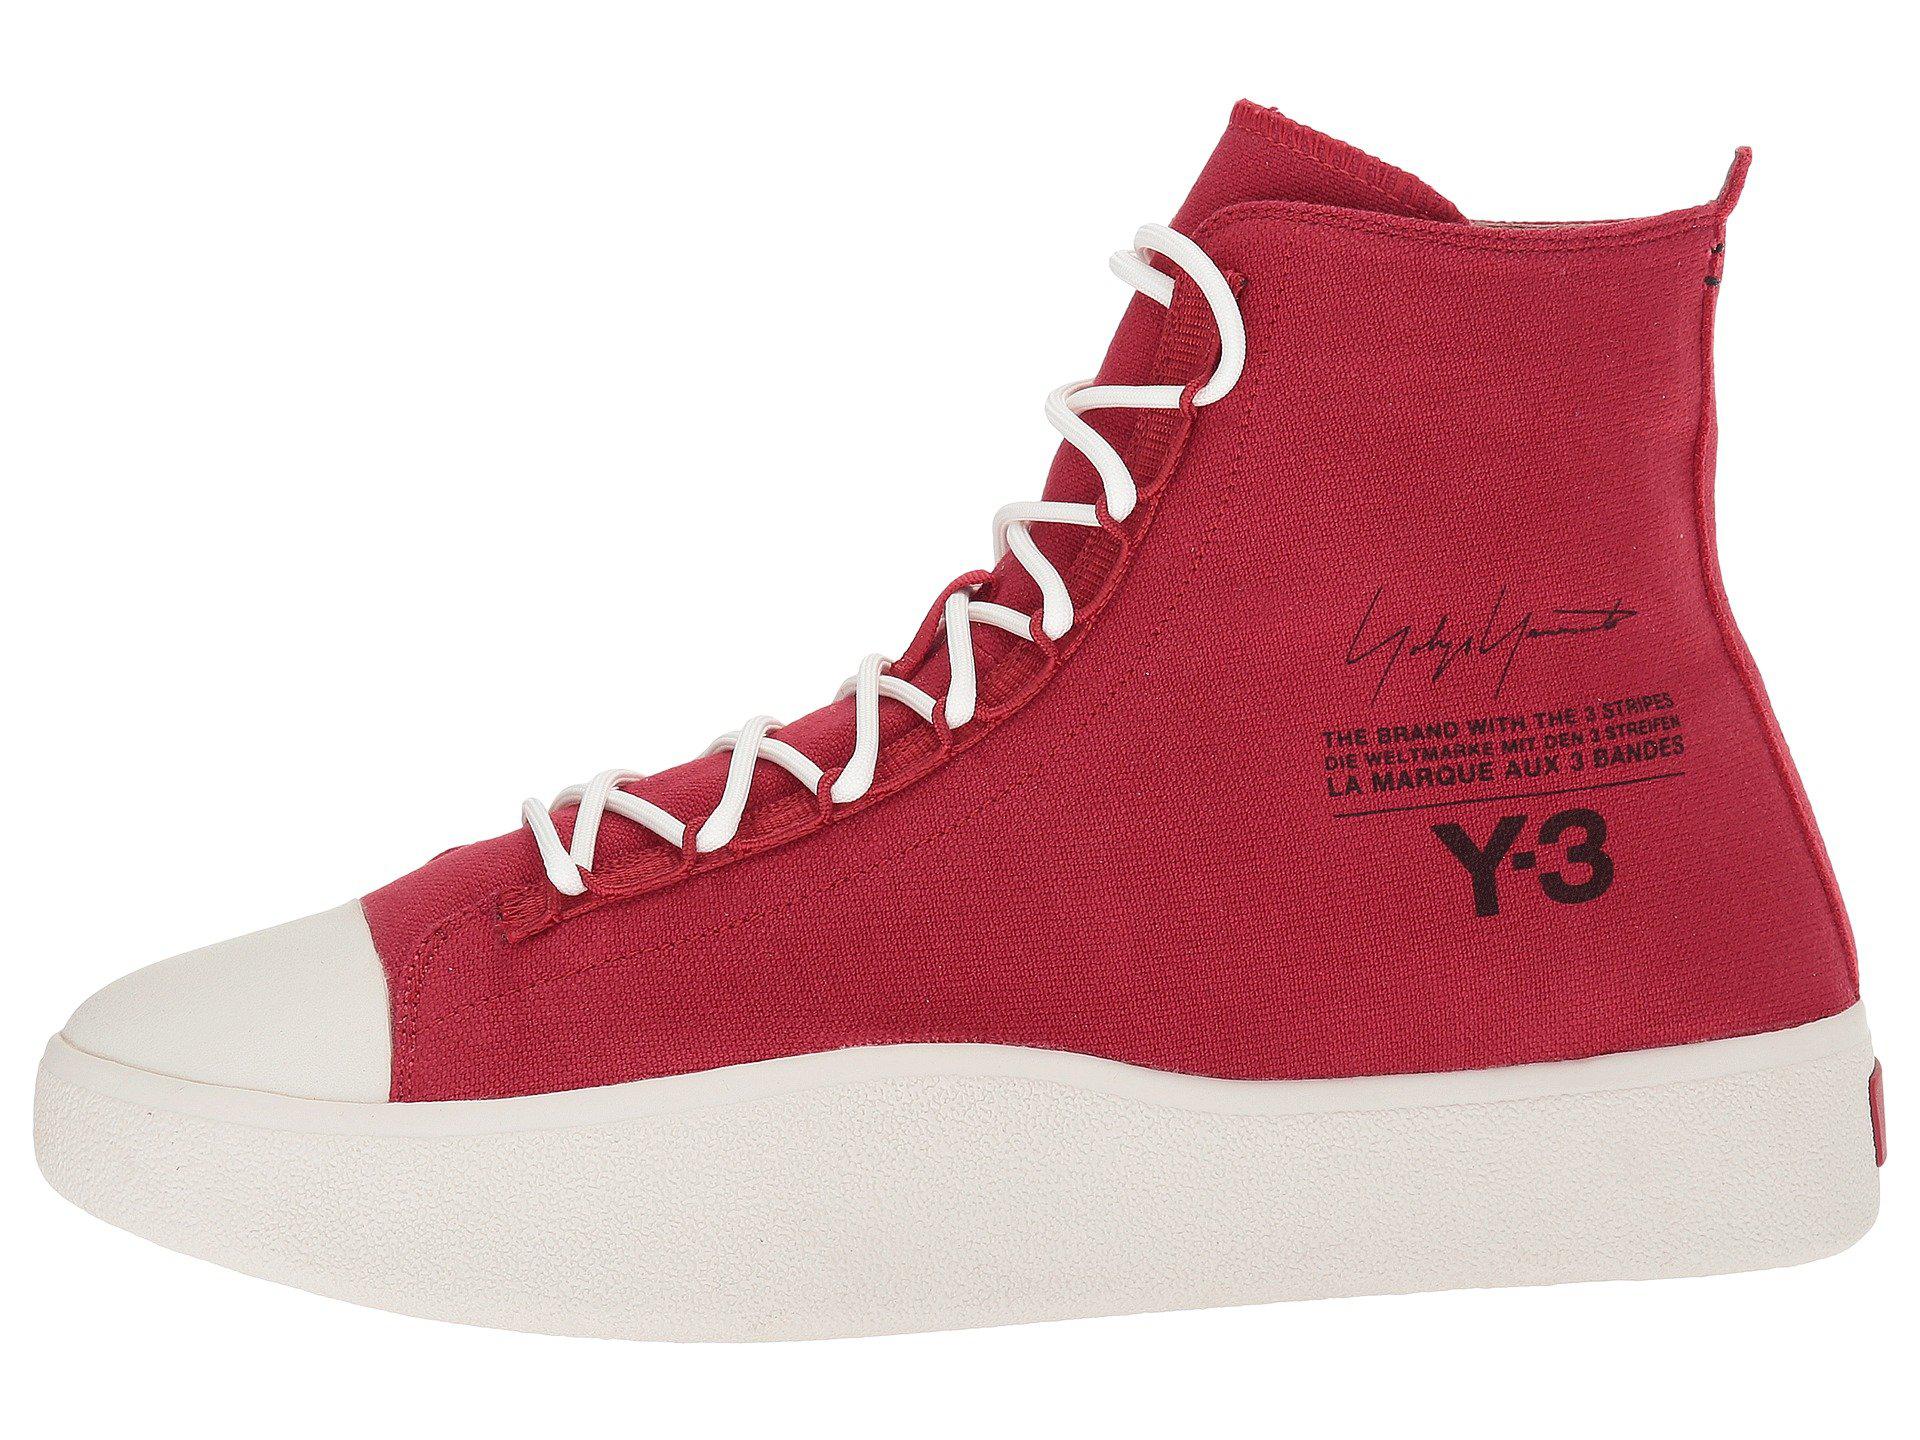 Y-3 Canvas Bashyo in Red for Men - Lyst